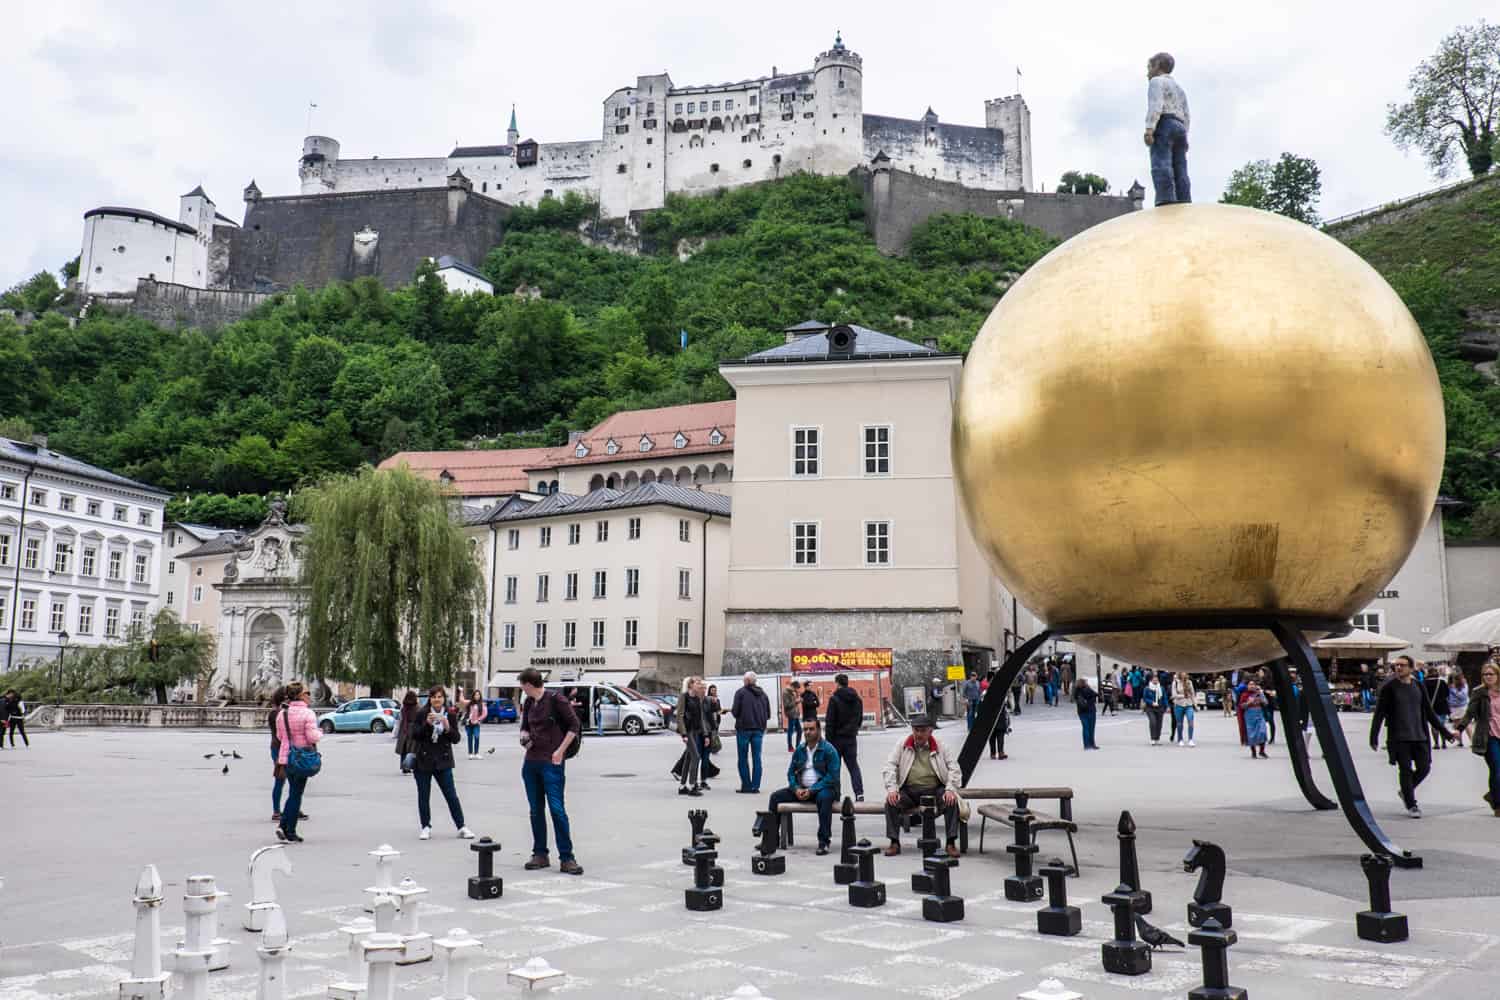 Modern artworks in Salzburg include a man standing on a giant golden globe and a large interactive chessboard. Both are found in a public square below a hilltop fortress. 